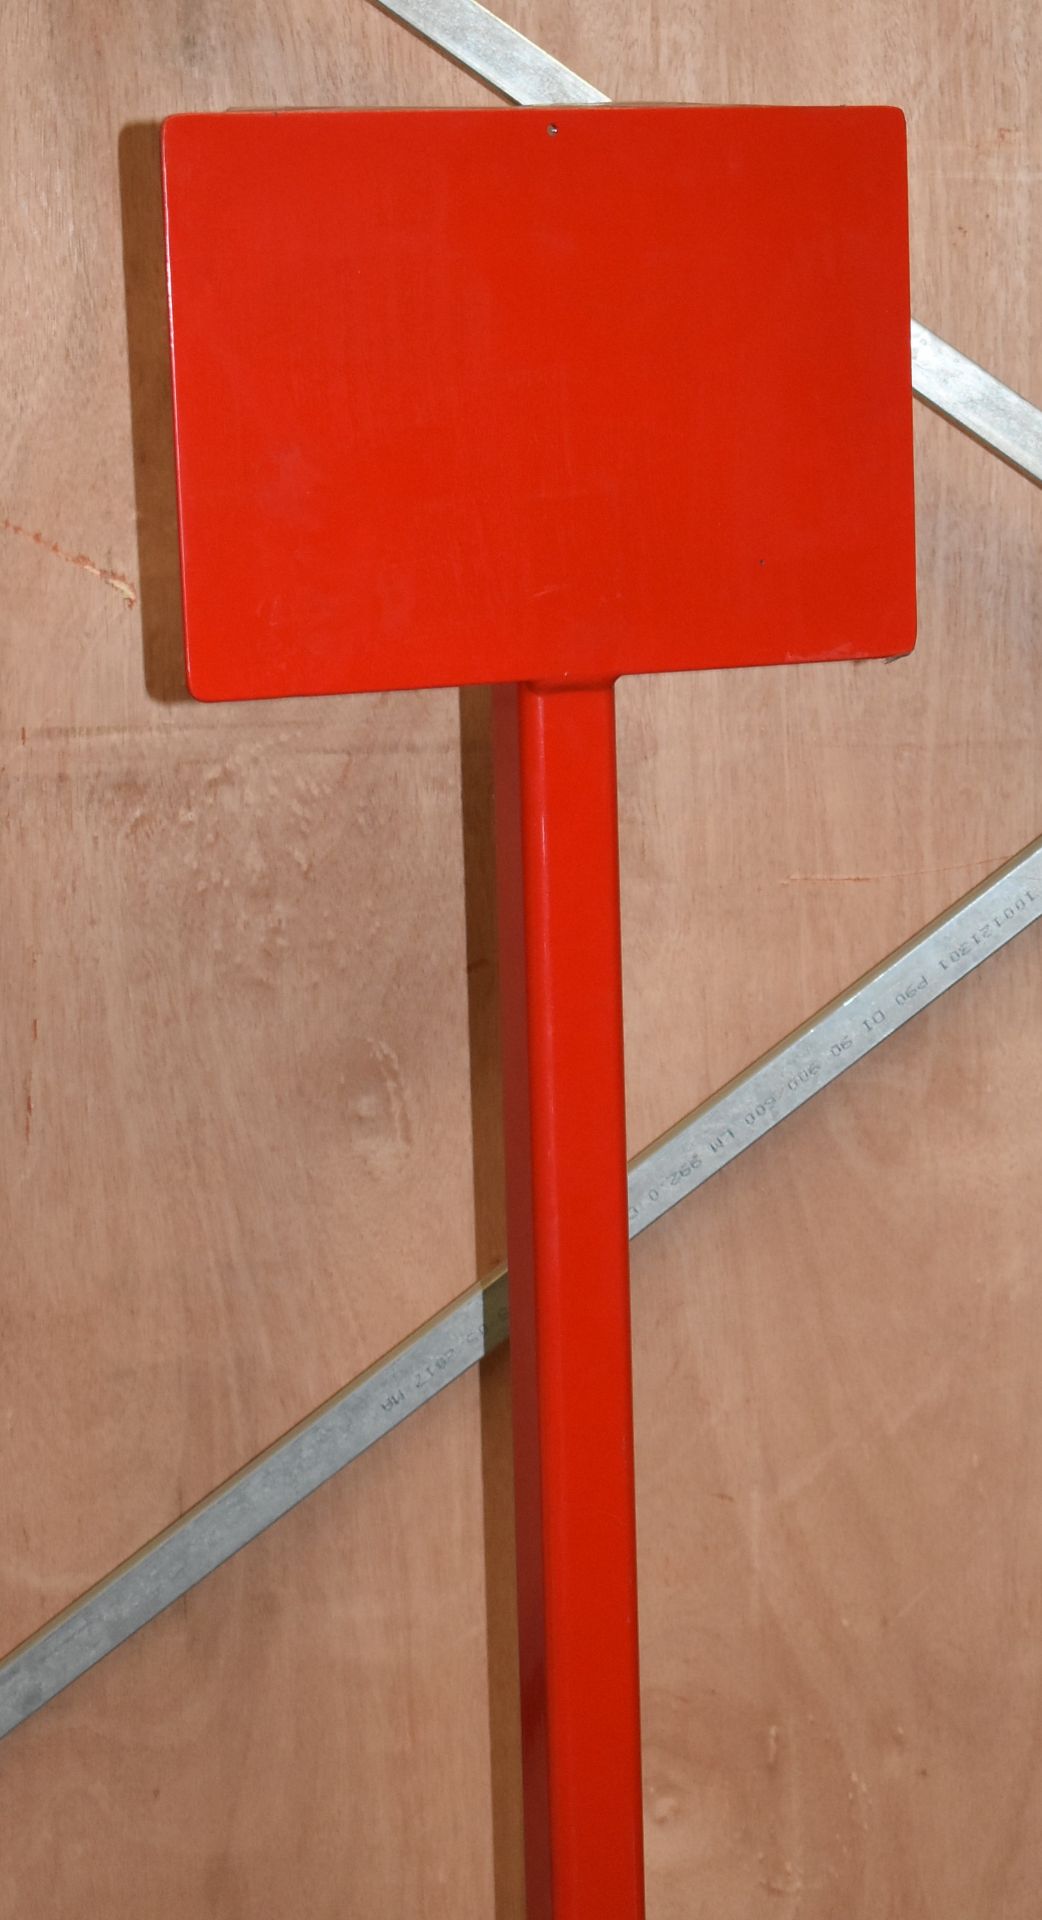 5 x Freestanding Heavy Duty Notice Stands in Red - Ideal For Social Distancing Warning Signs - - Image 5 of 7